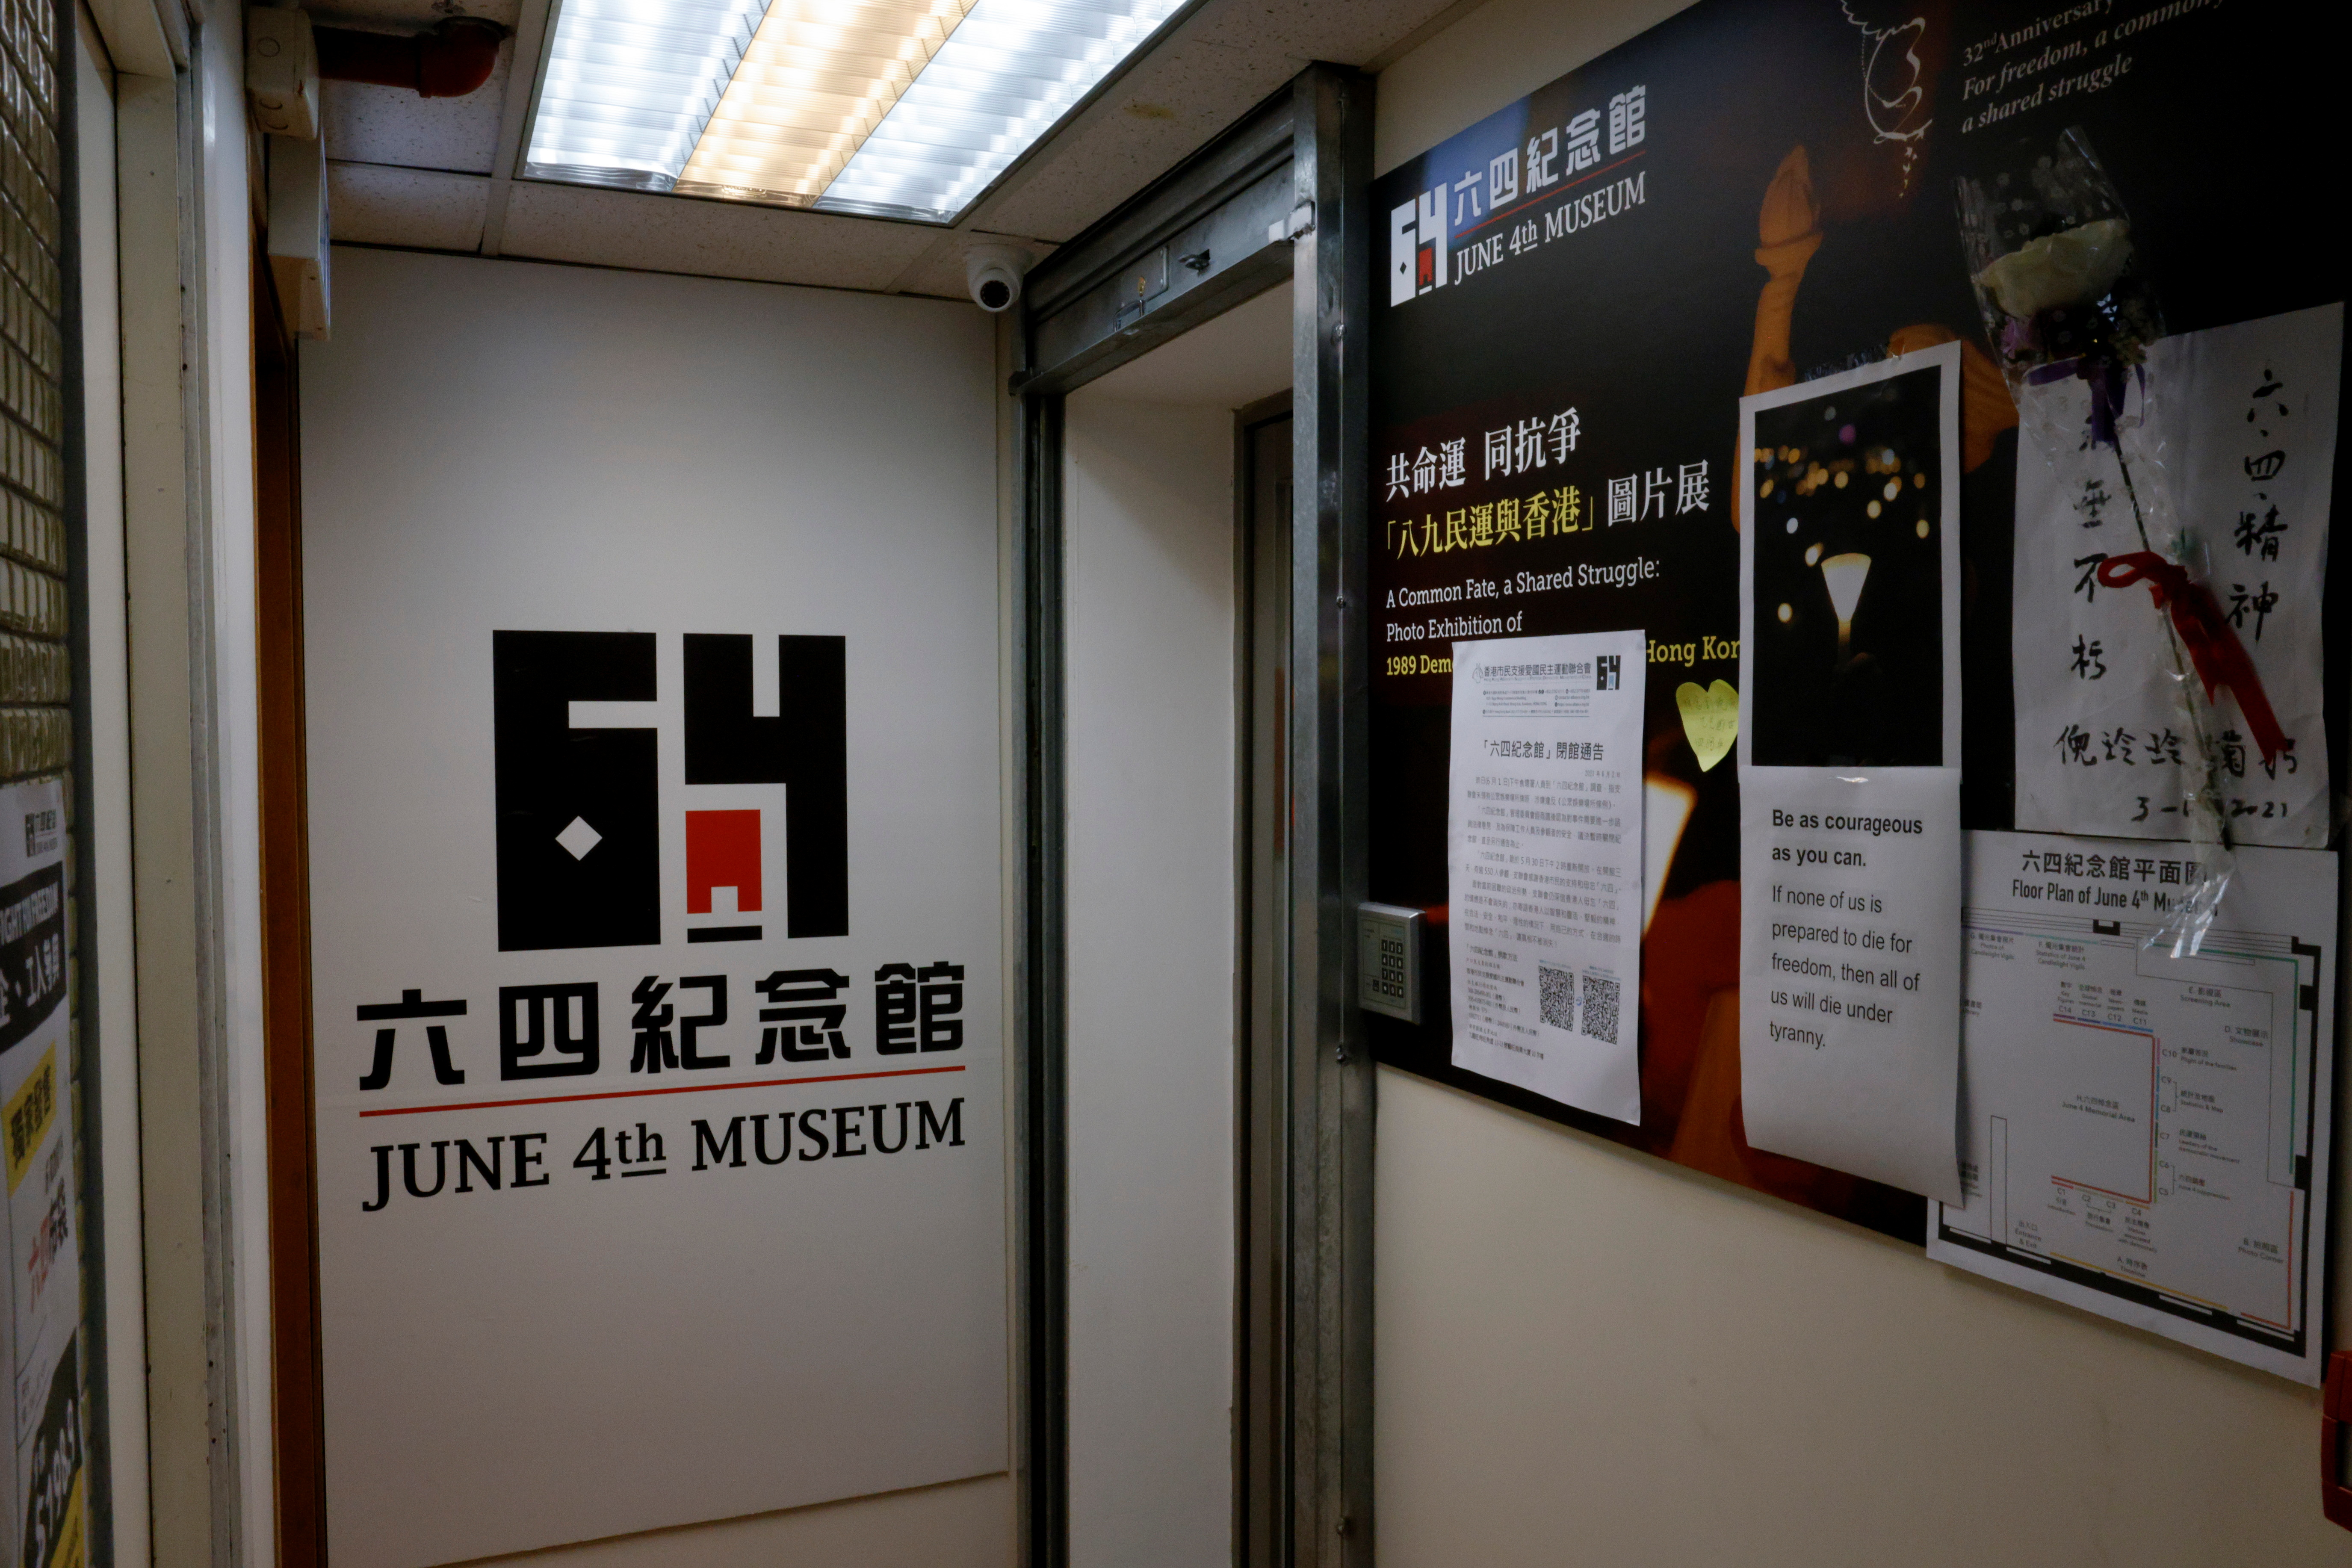 View shows June 4th Museum in Hong Kong